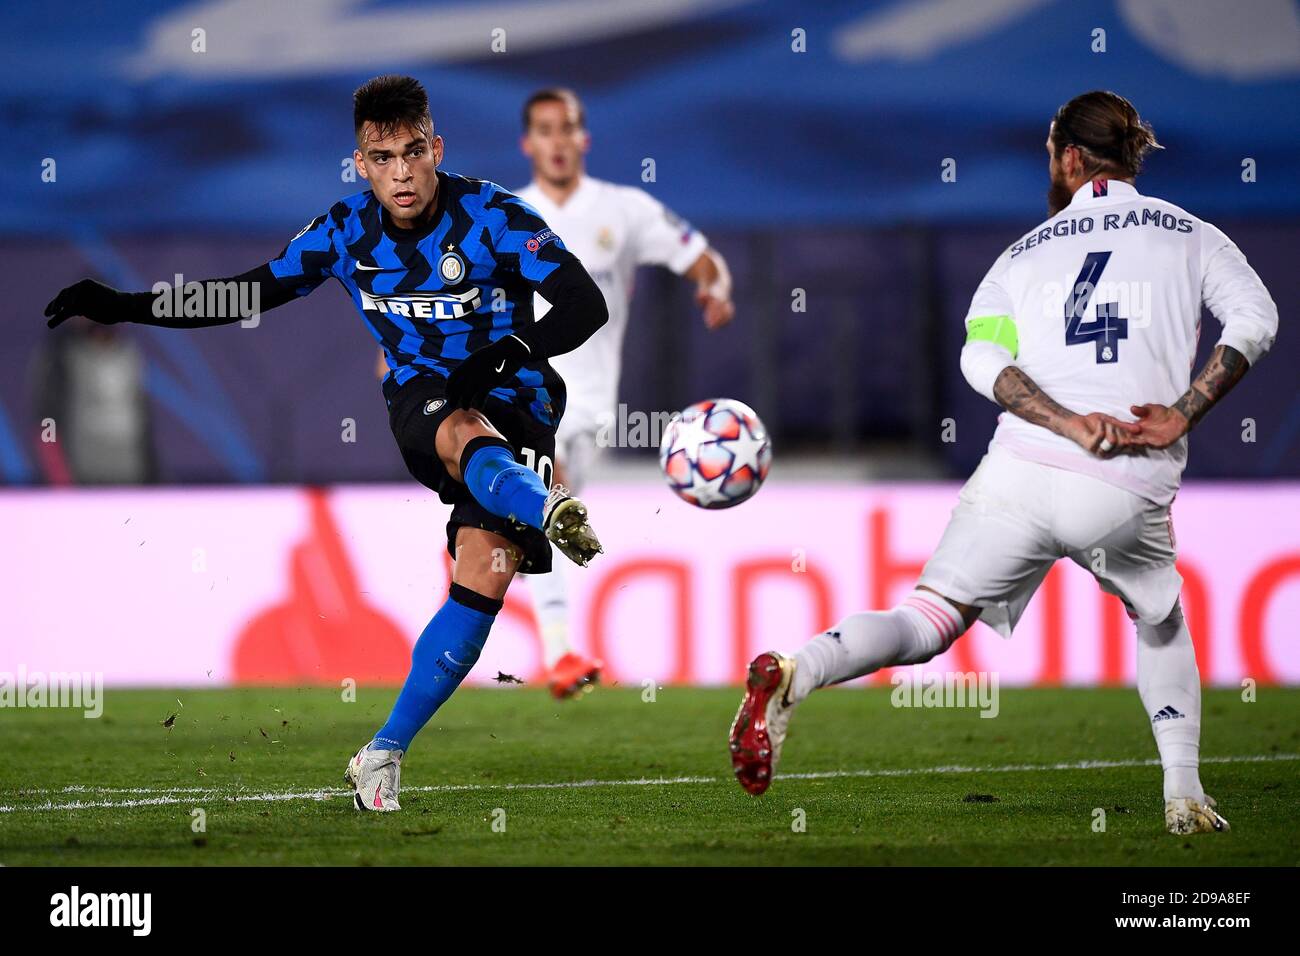 Madrid, Spain - 03 November, 2020: Lautaro Martinez (L) of FC Internazionale is challenged by Sergio Ramos of Real Madrid CF during the Champions League Group B football match between Real Madrid CF and FC Internazionale. Real Madrid CF won 3-2 over FC Internazionale. Credit: Nicolò Campo/Alamy Live News Stock Photo